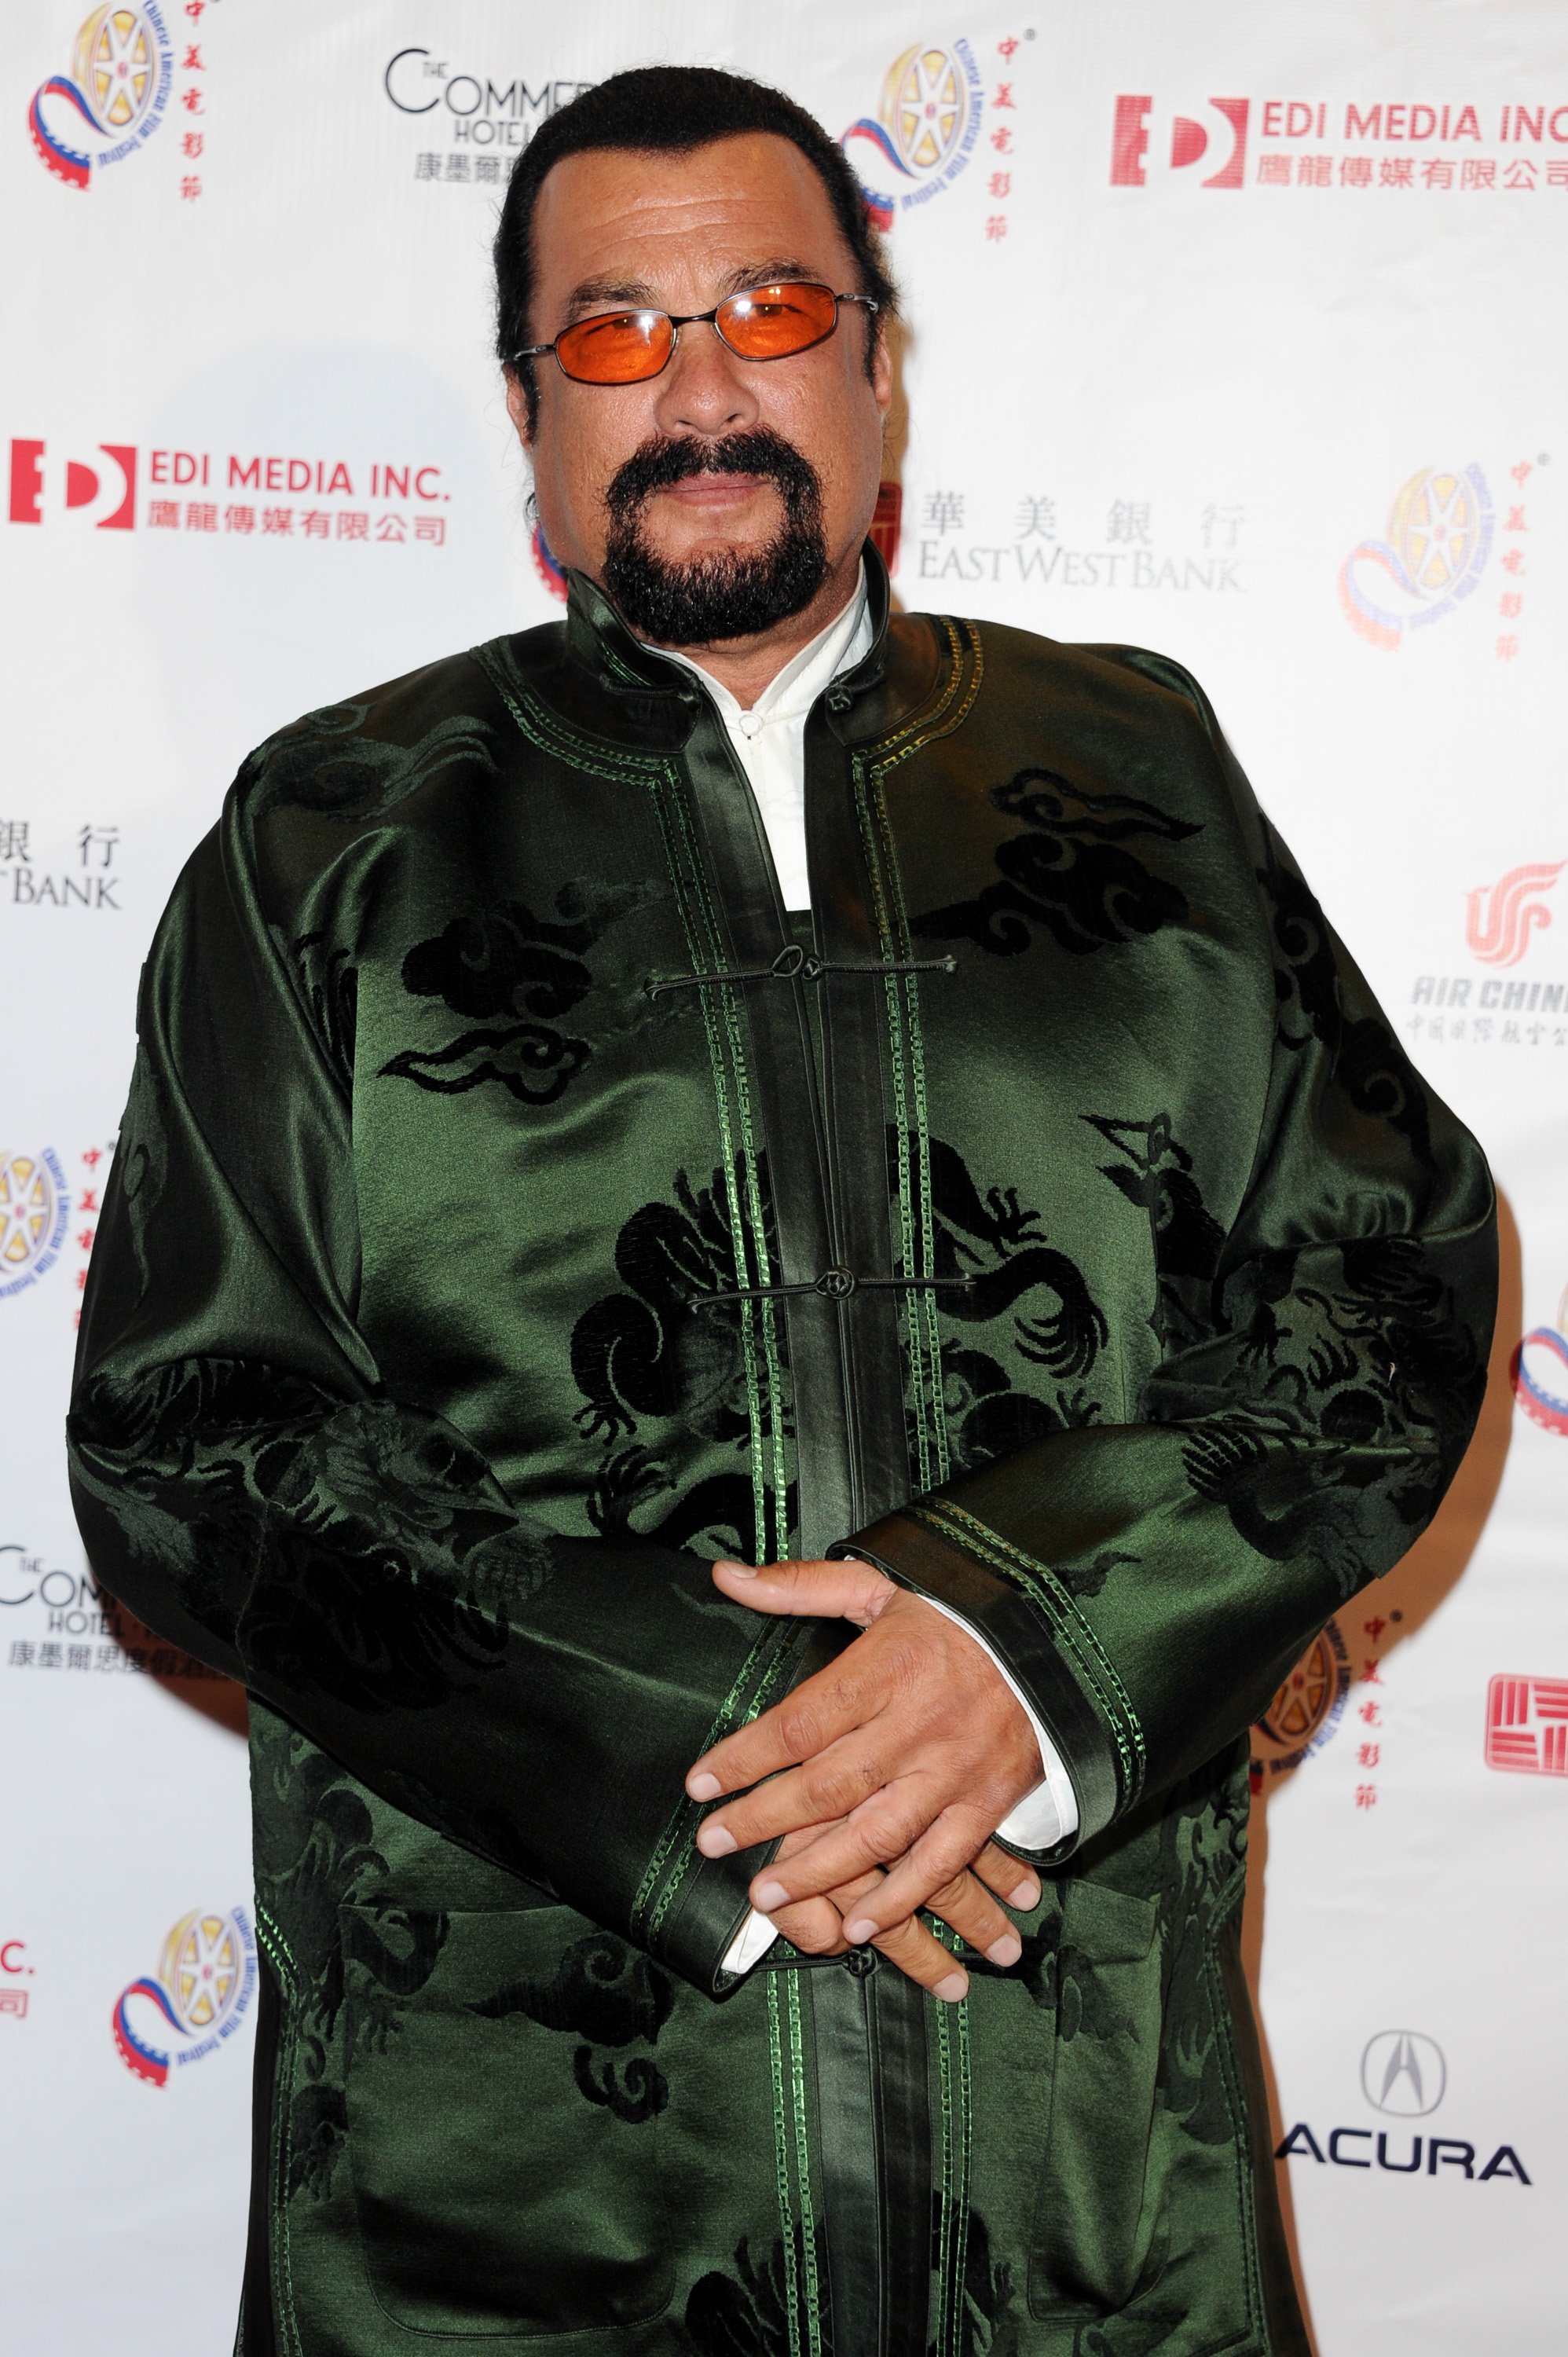 Actor Steven Seagal at Pasaden Civic Auditorium on November 4 2014 | Source: Getty Images